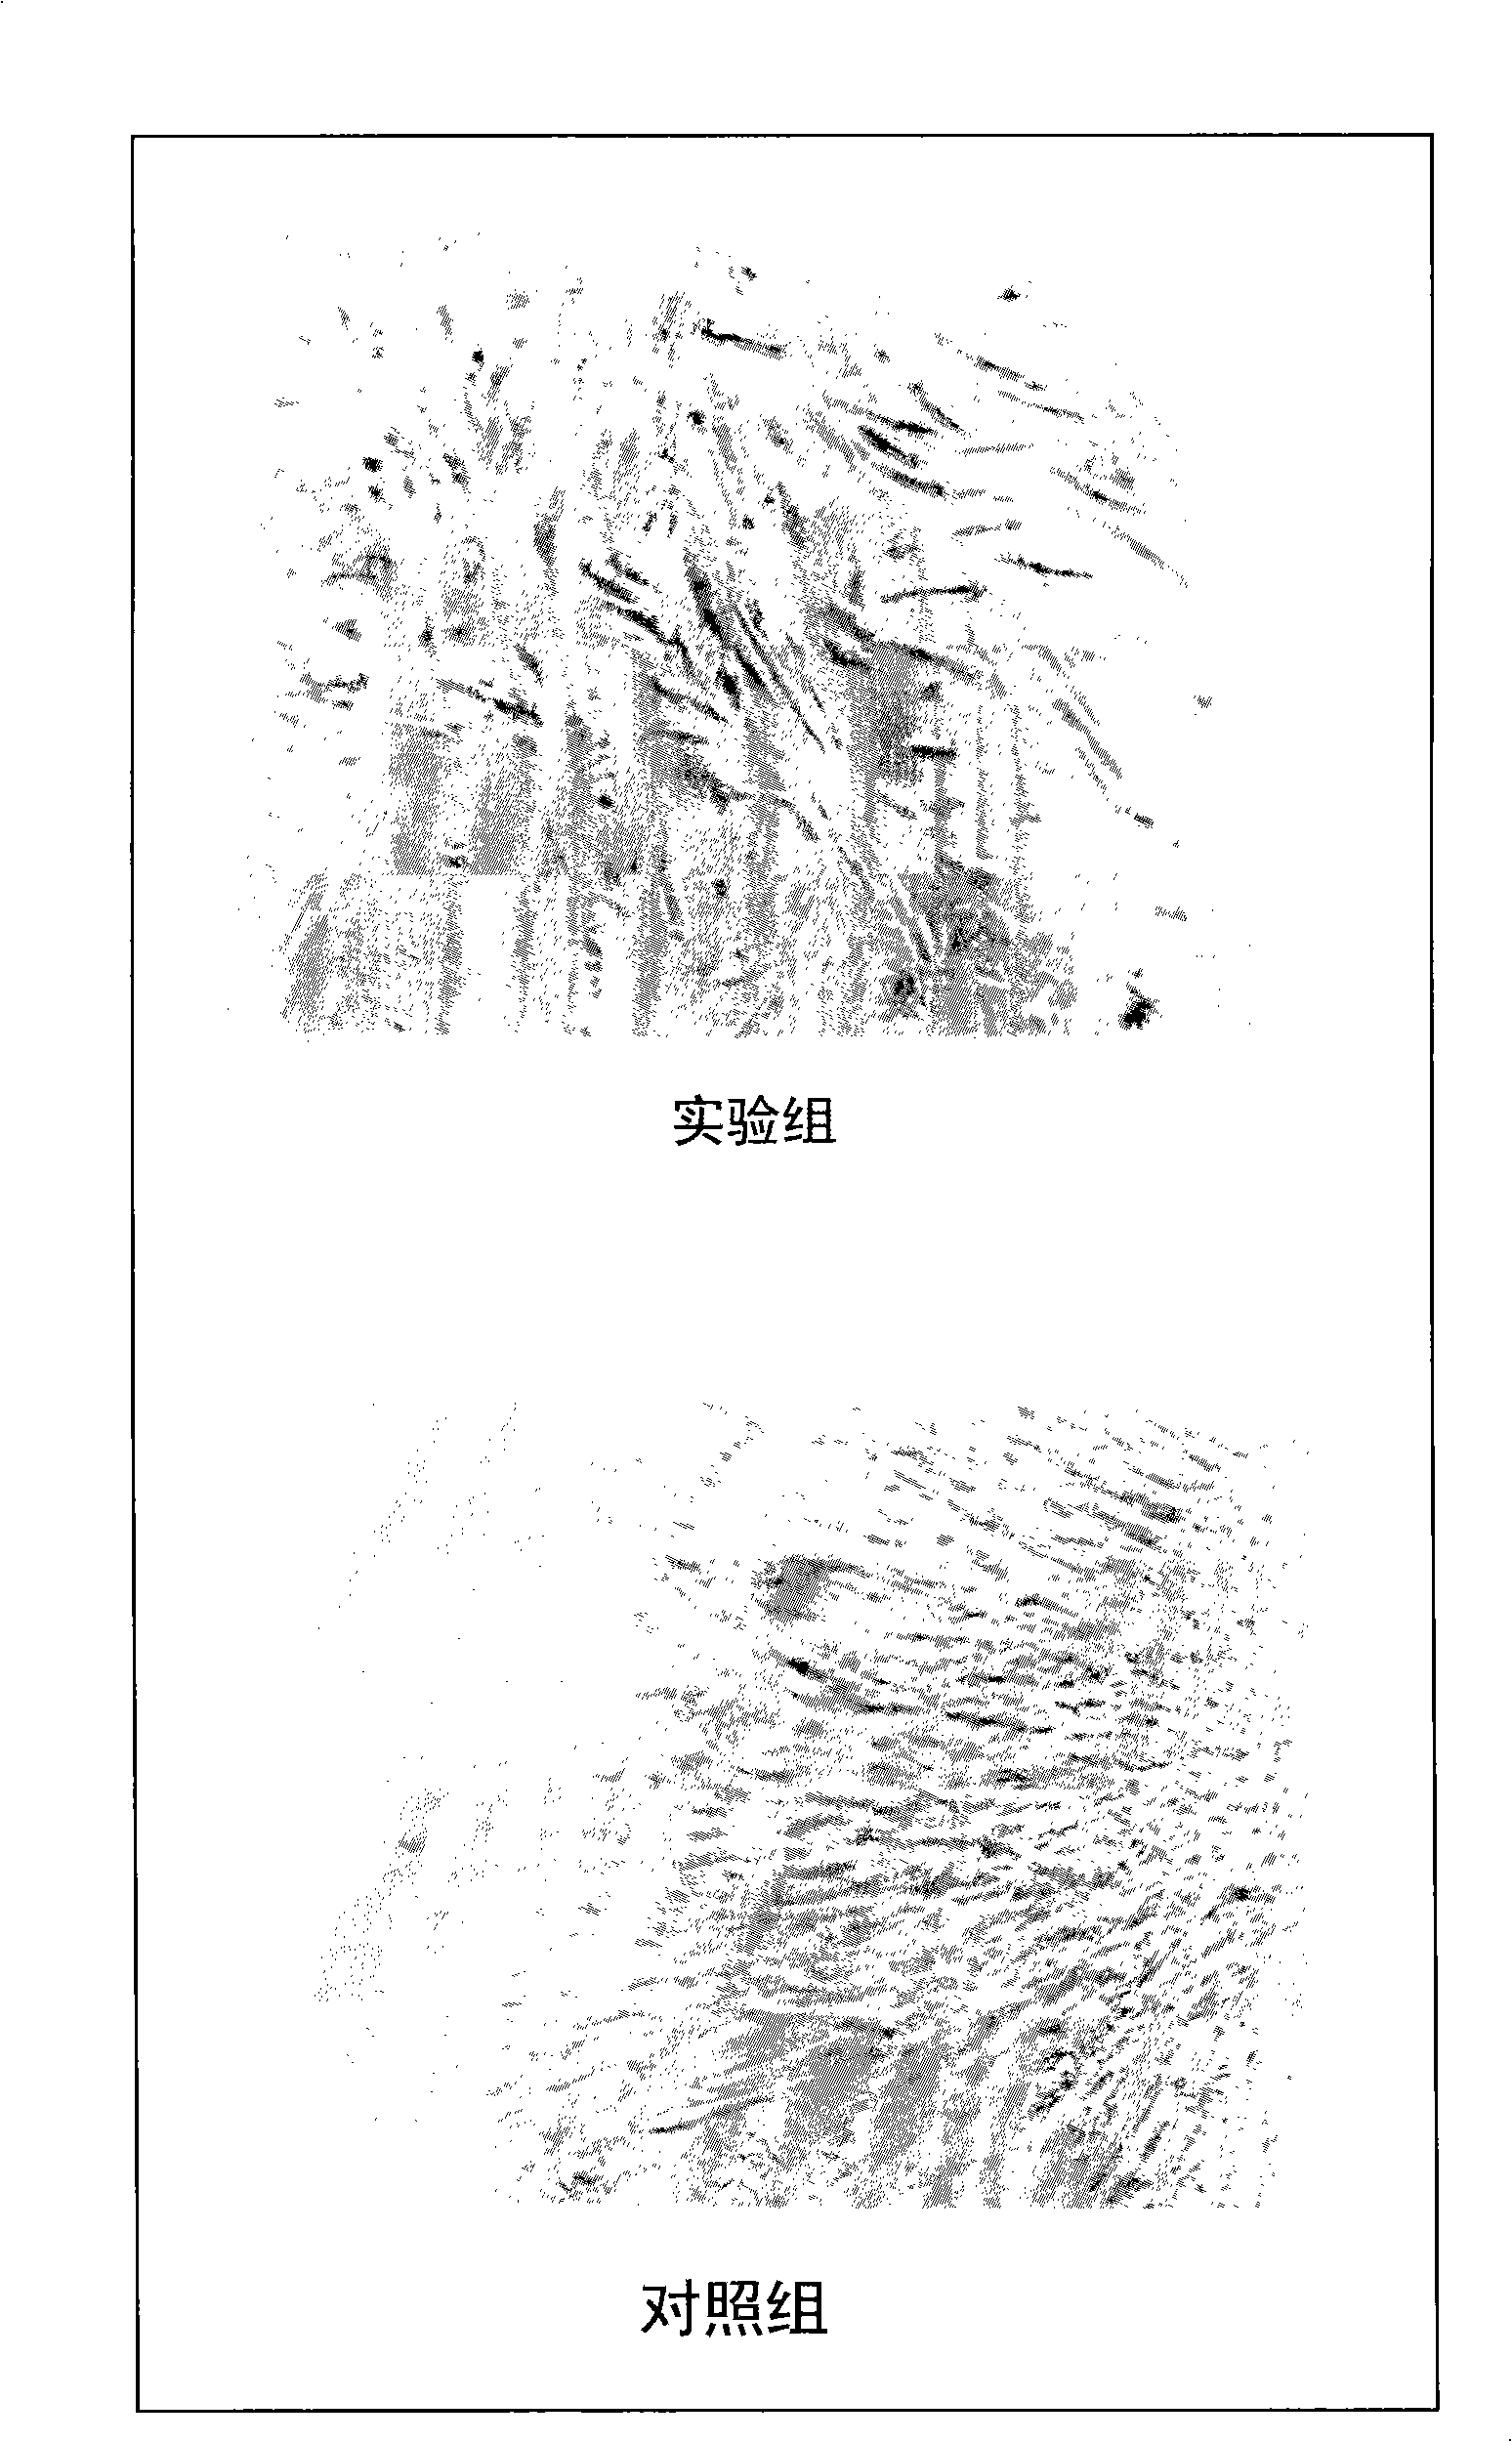 Medicine for treating nerves damage and preparation method thereof